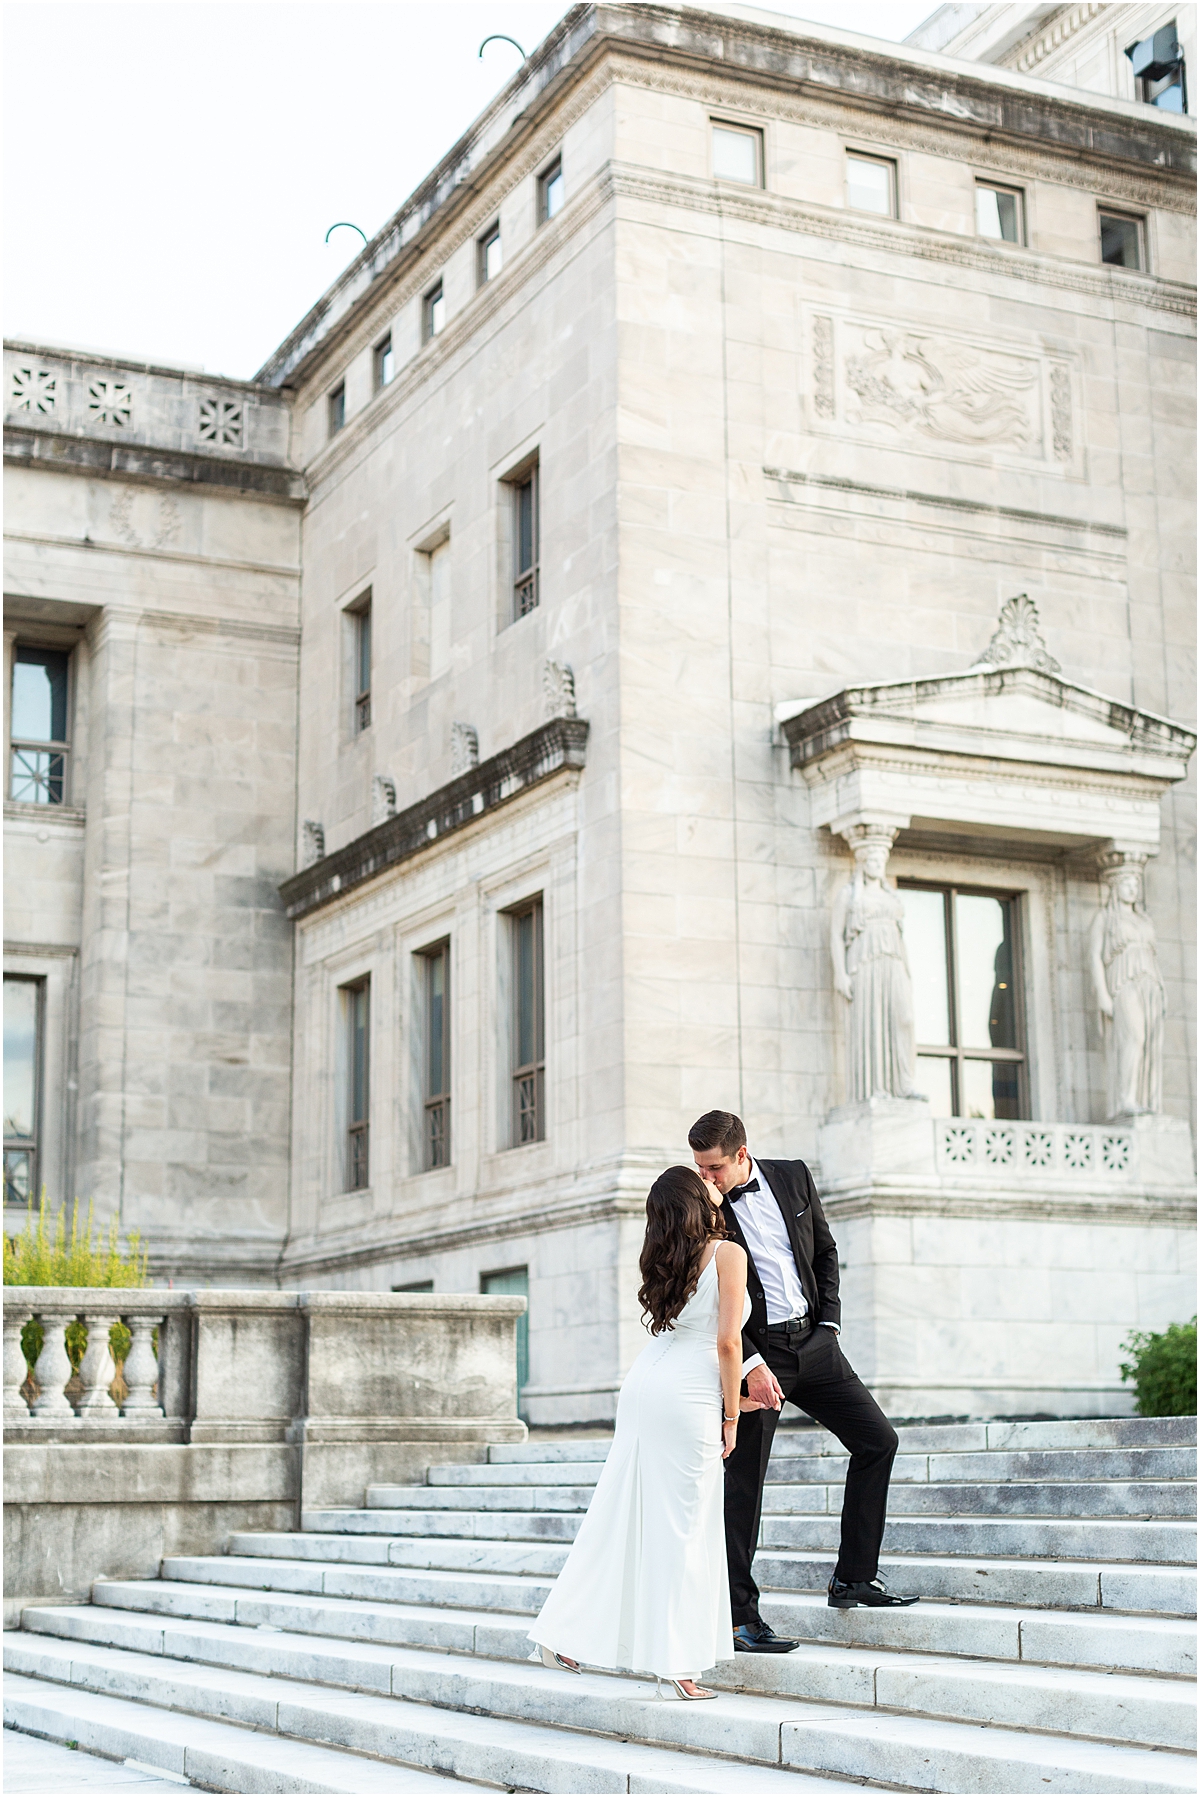 Timeless engagement photos at iconic Chicago locations 